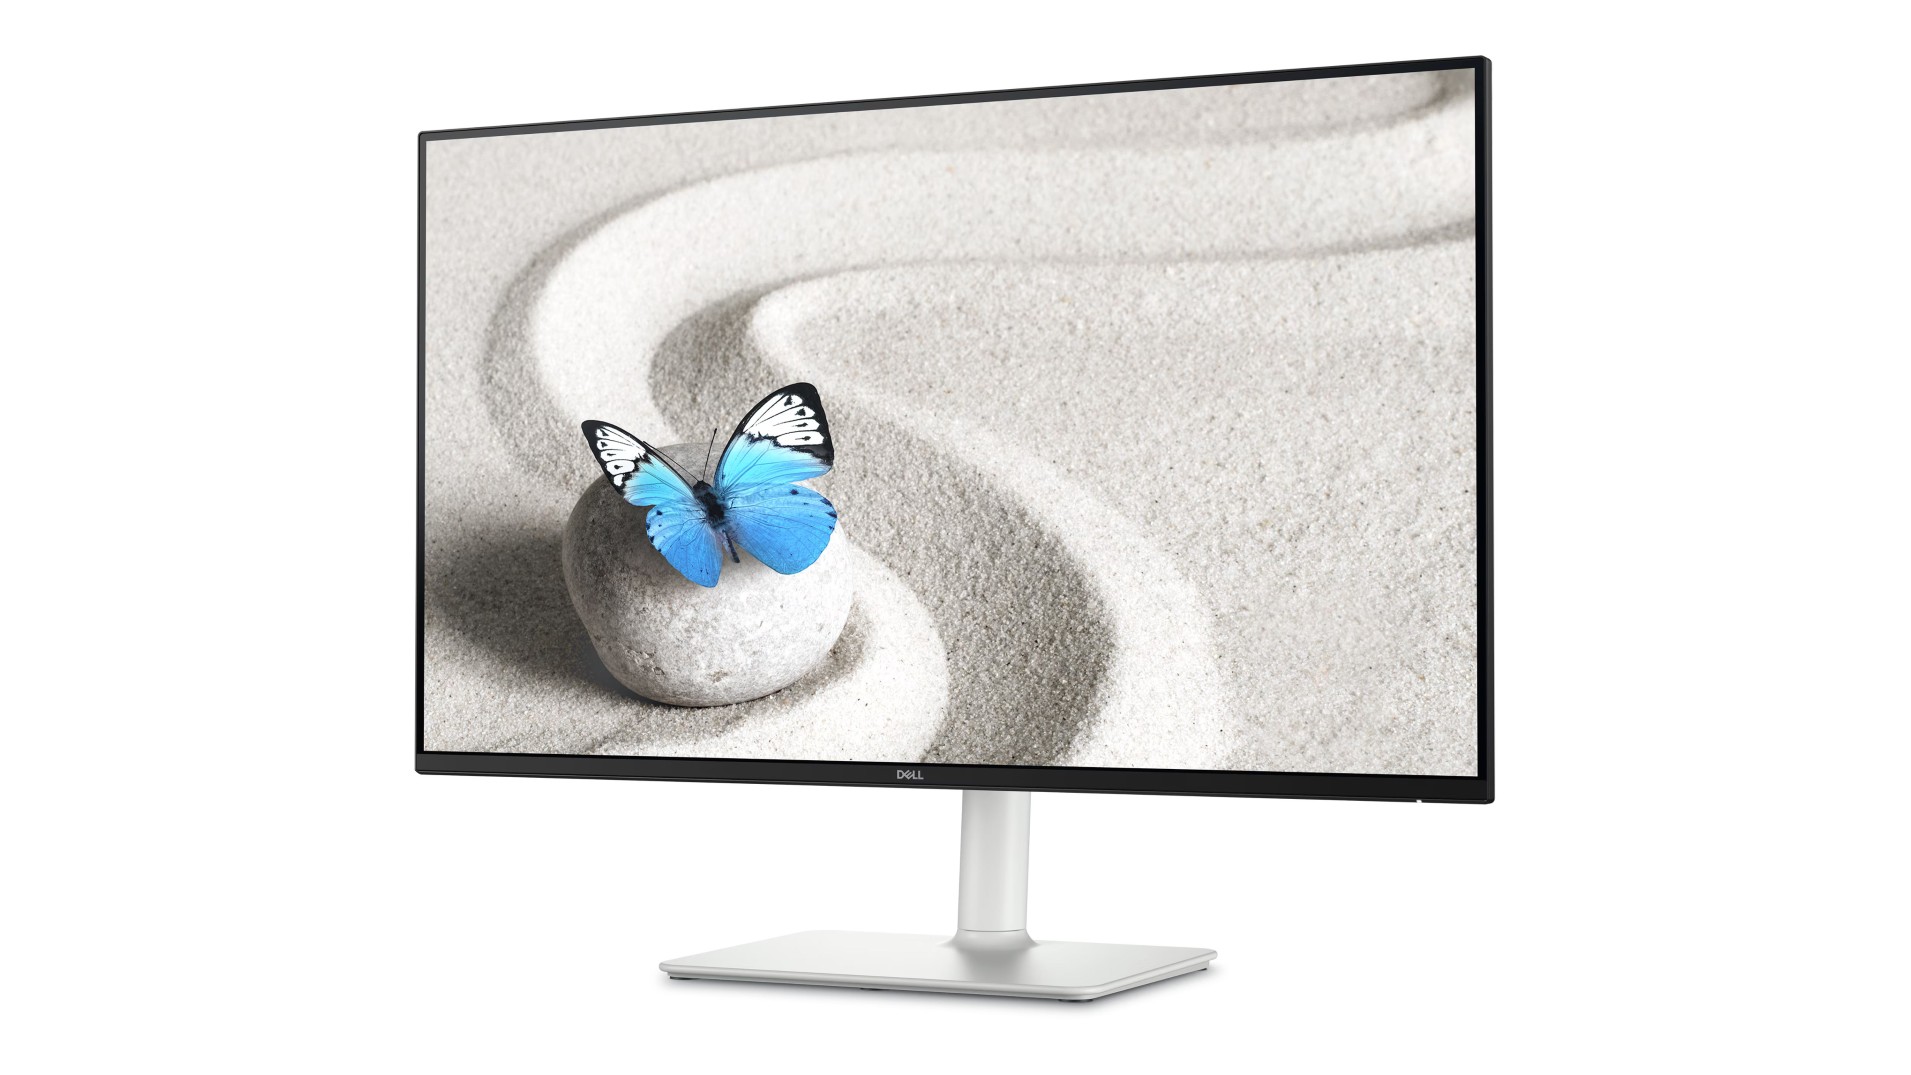 This 27-inch, 1440p Dell monitor for $160 is an absolute steal